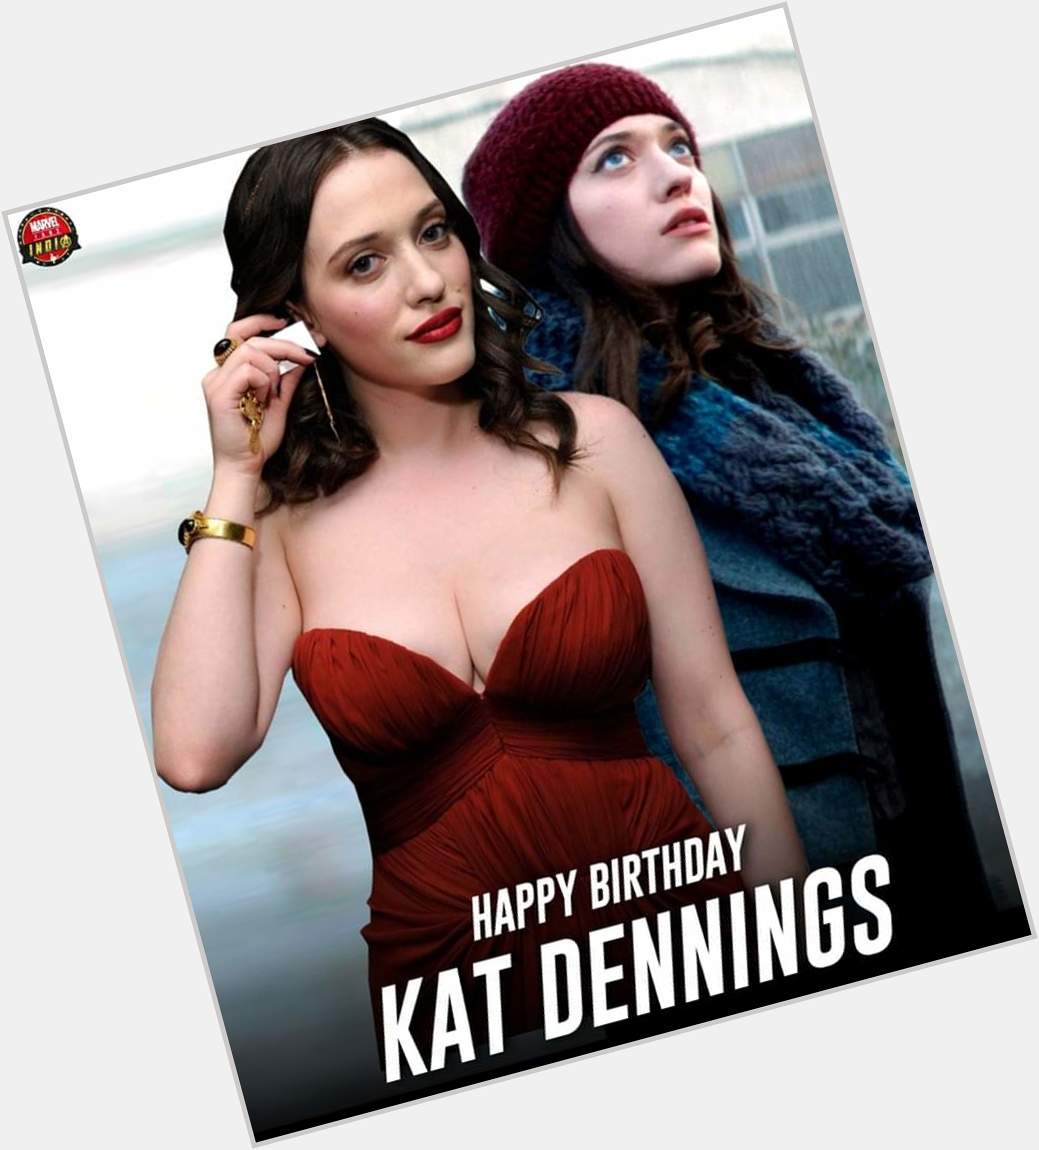  Wishing a Happy Birthday to Kat Dennings who portrays Darcy Lewis in the MCU    